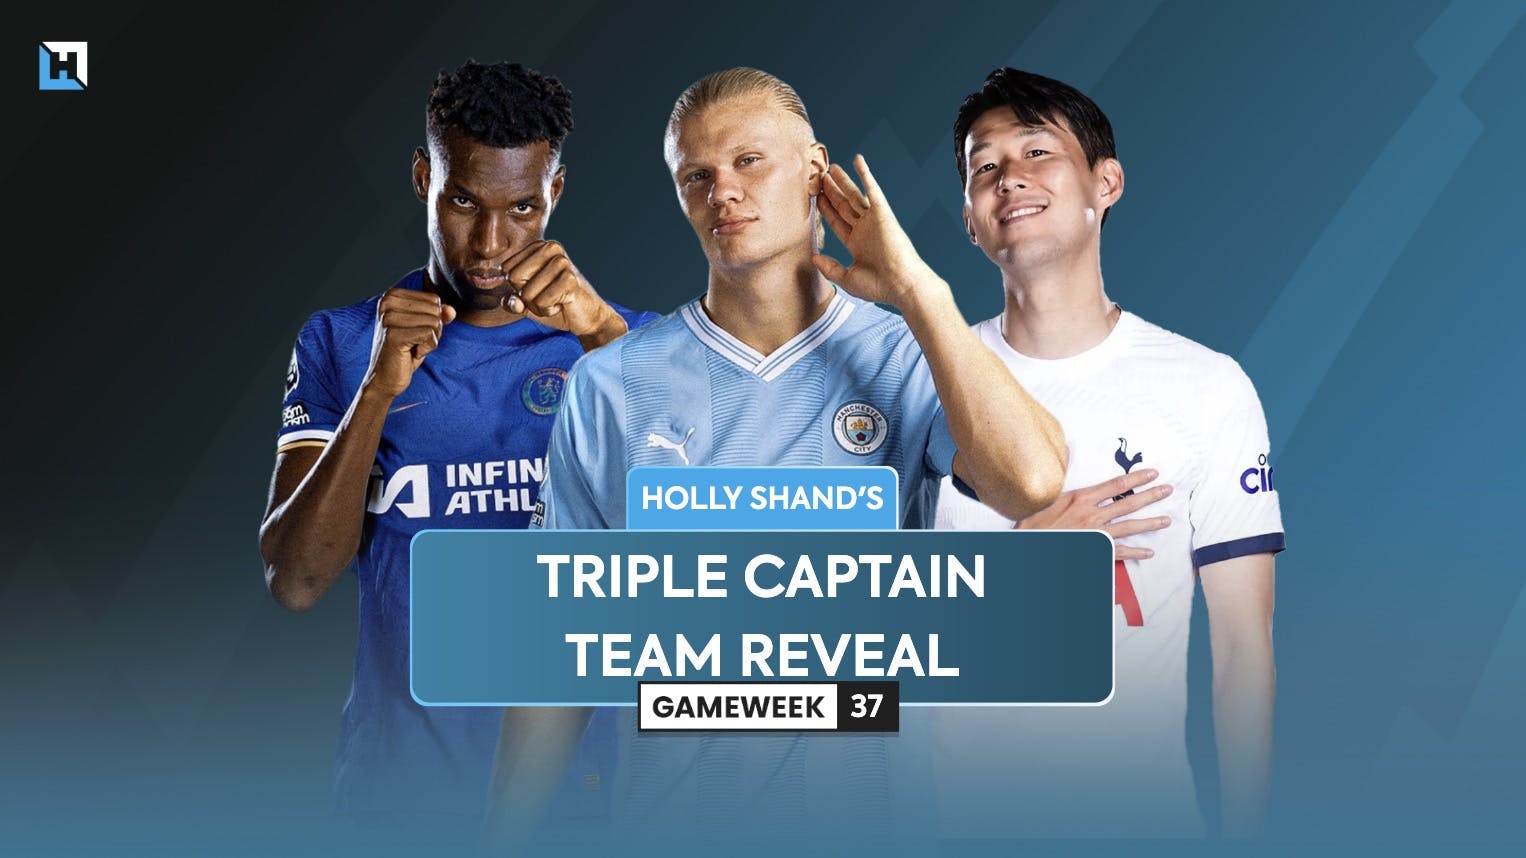 Holly Shand’s FPL Double Gameweek 37 Triple Captain team reveal